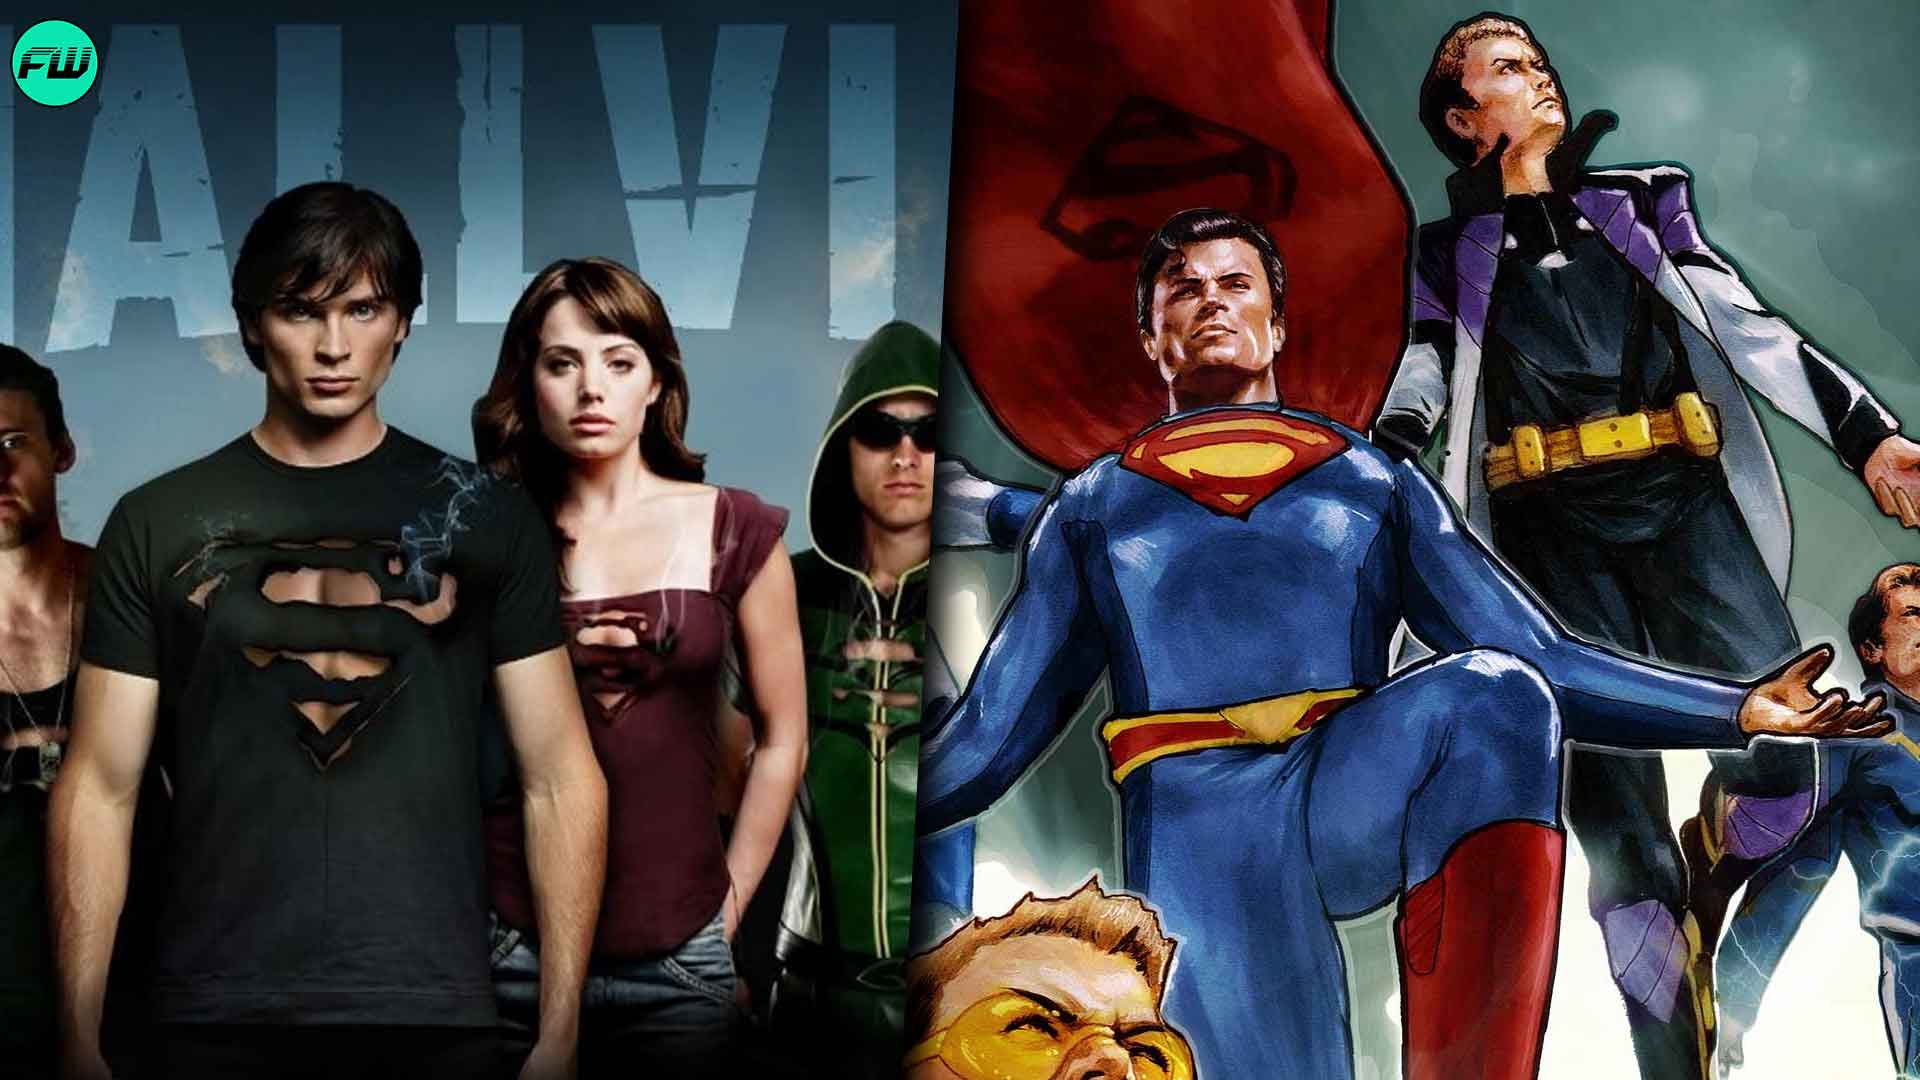 Smallville Animated Series: Tom Welling and Michael Rosenbaum Give Update